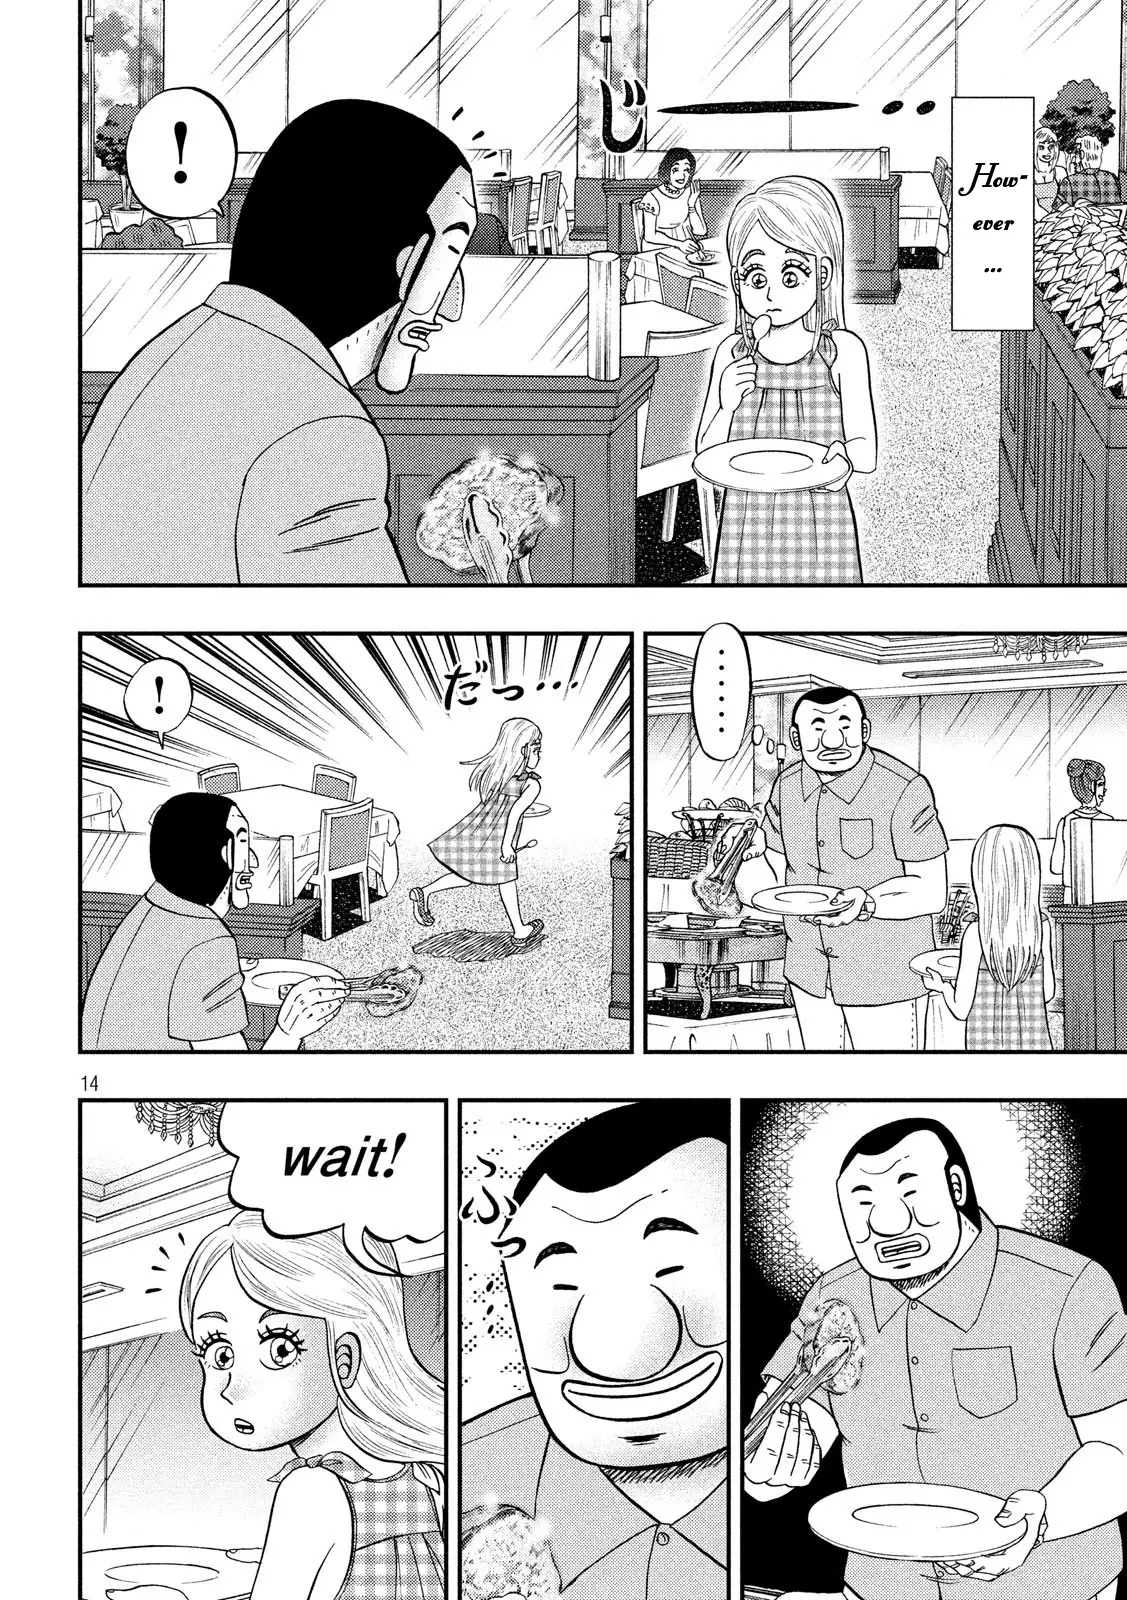 One Day Outing Foreman - 54 page 14-985c8077